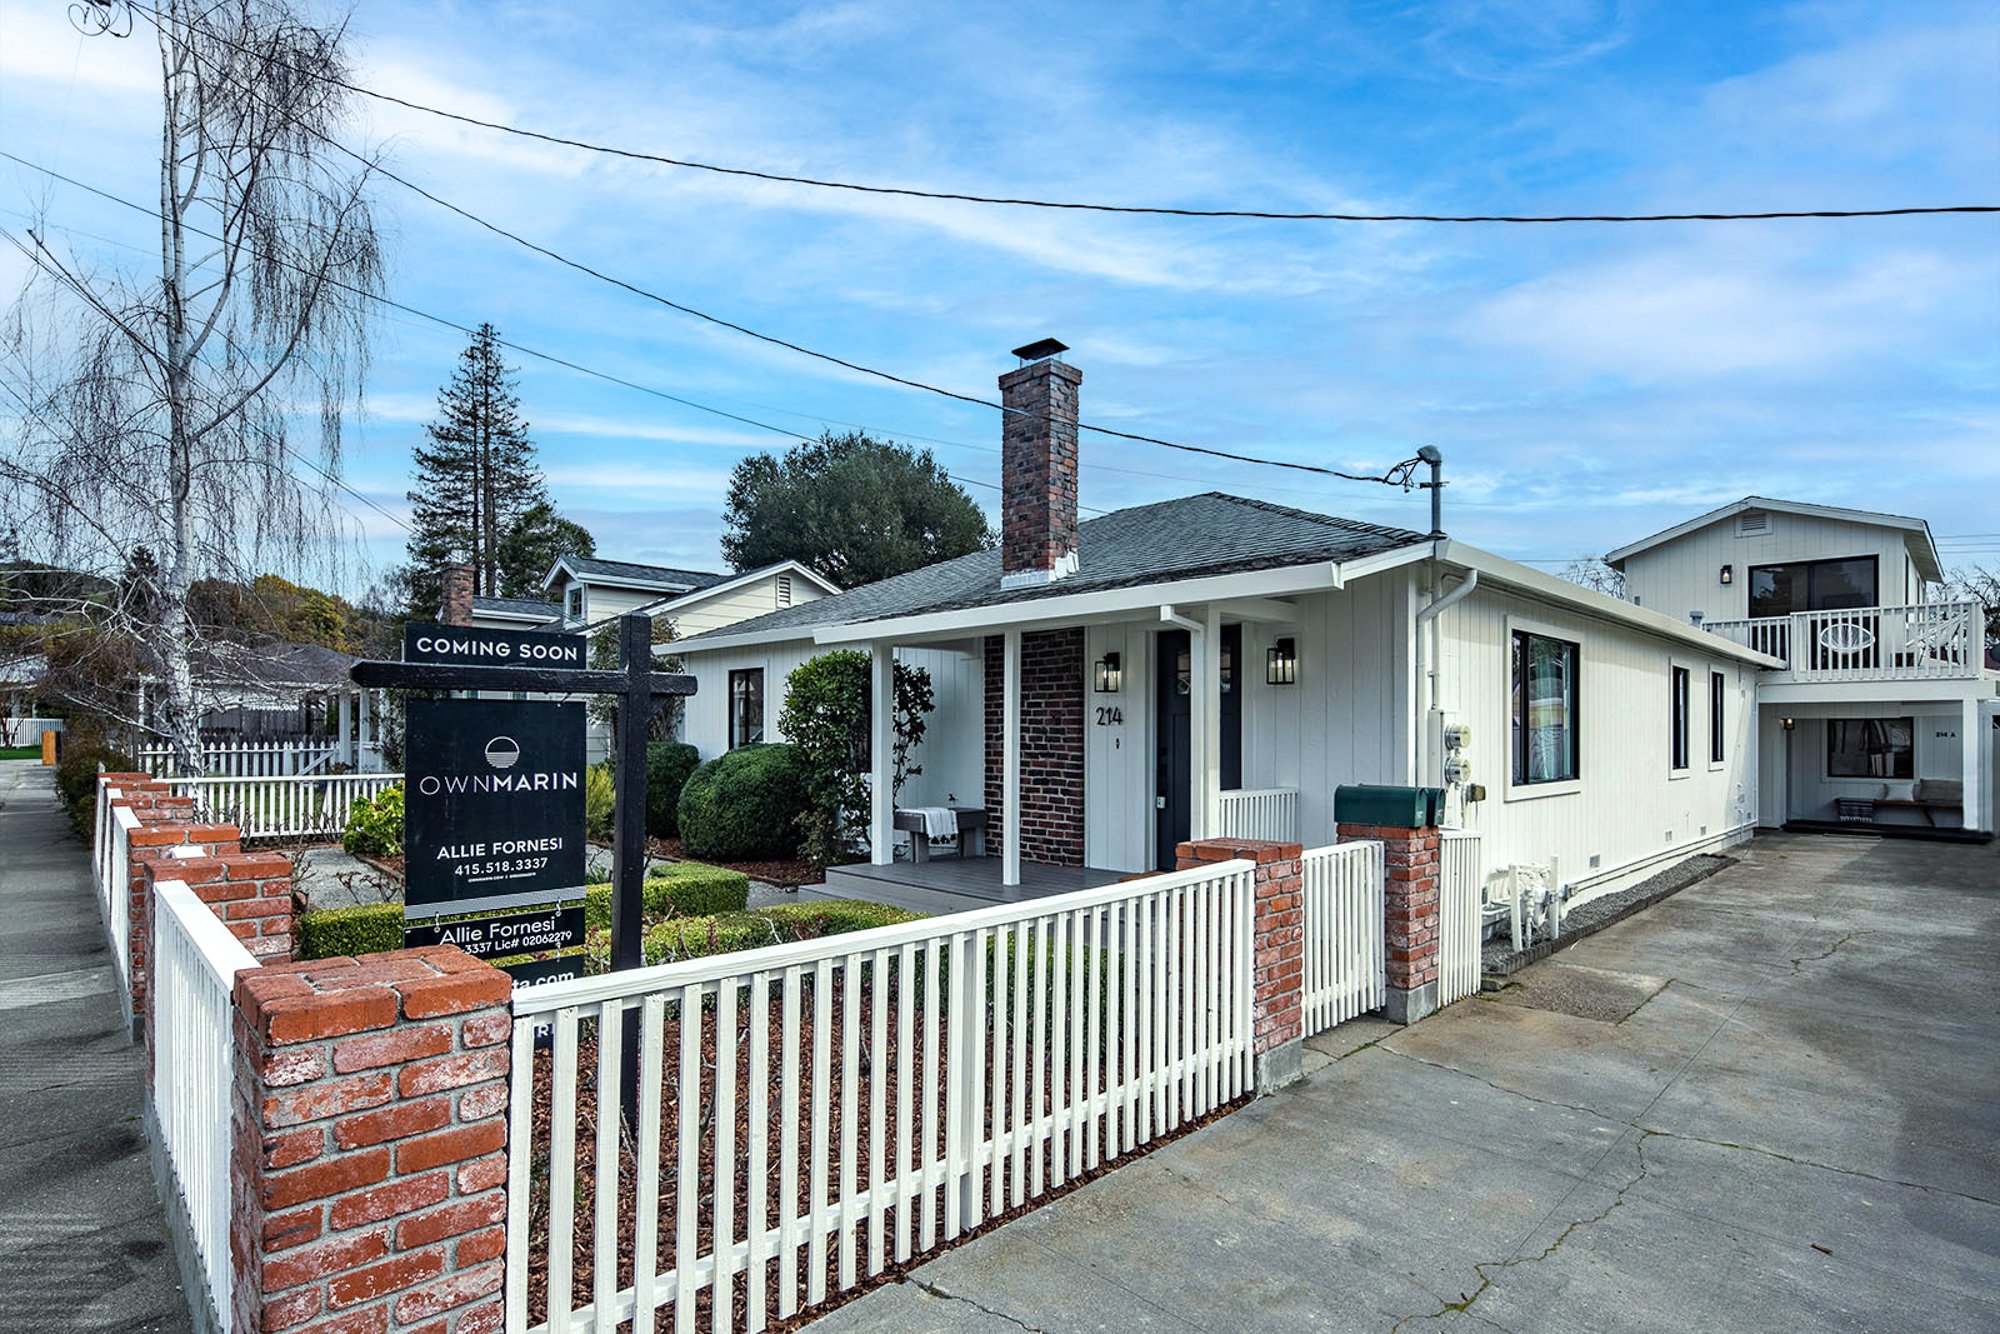 Home For Sale_ 214 Amicita Ave, Mill Valley Best Realtor Allie Fornesi _ Own Marin County-58.jpg